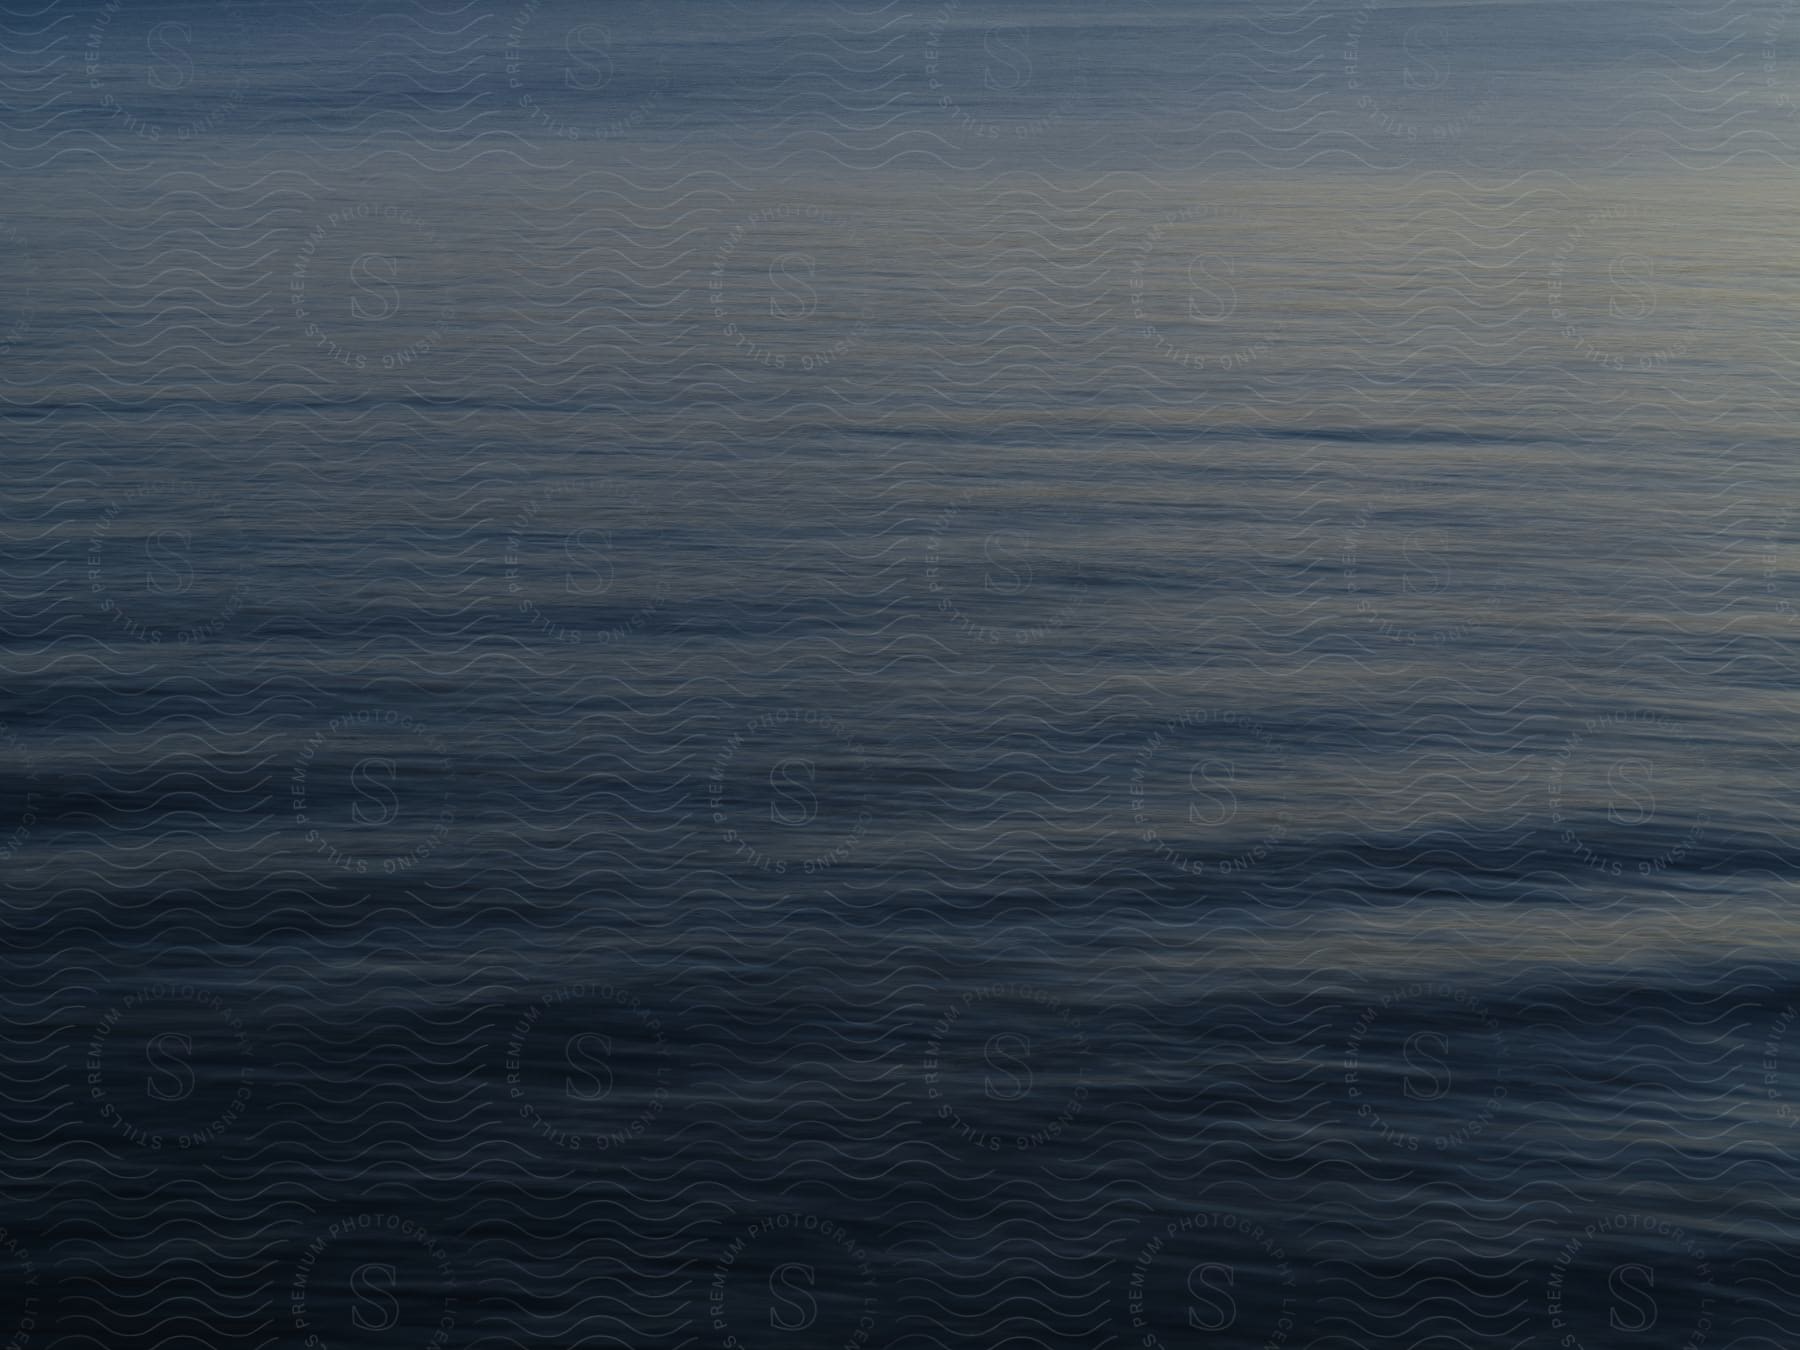 A dark blue body of water with a few ripples